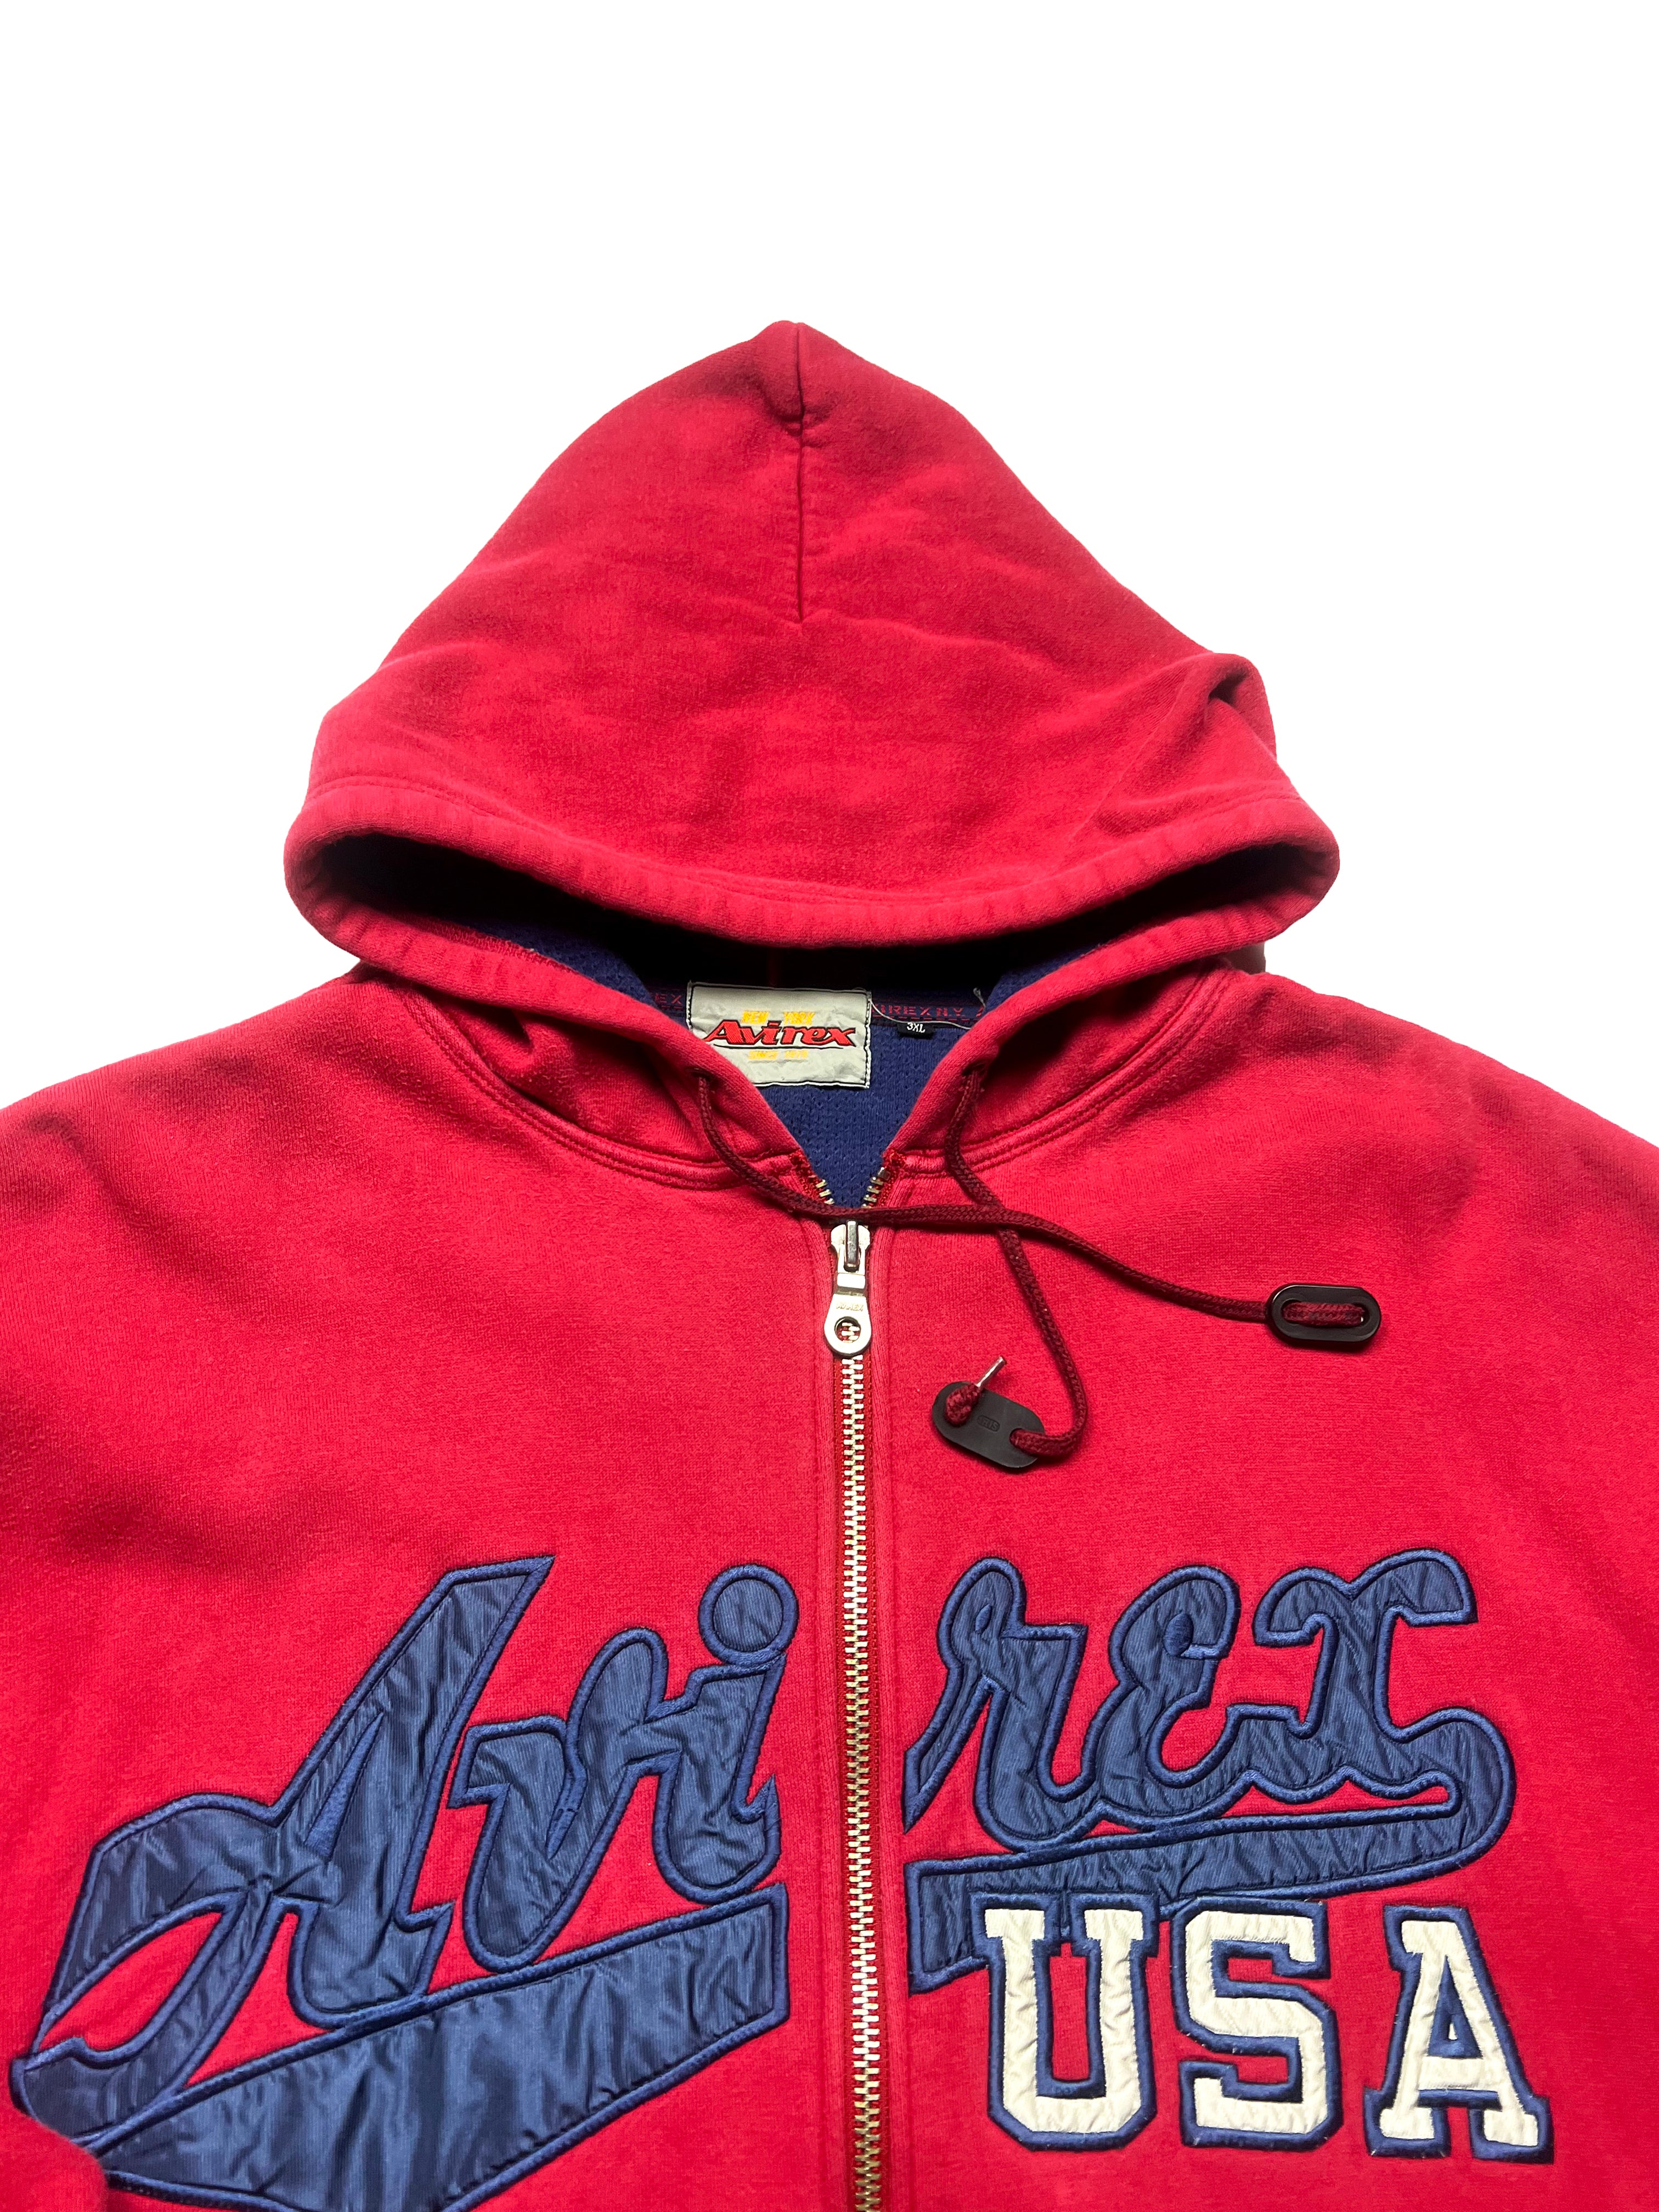 Avirex Red Spell Out Hoodie 90's